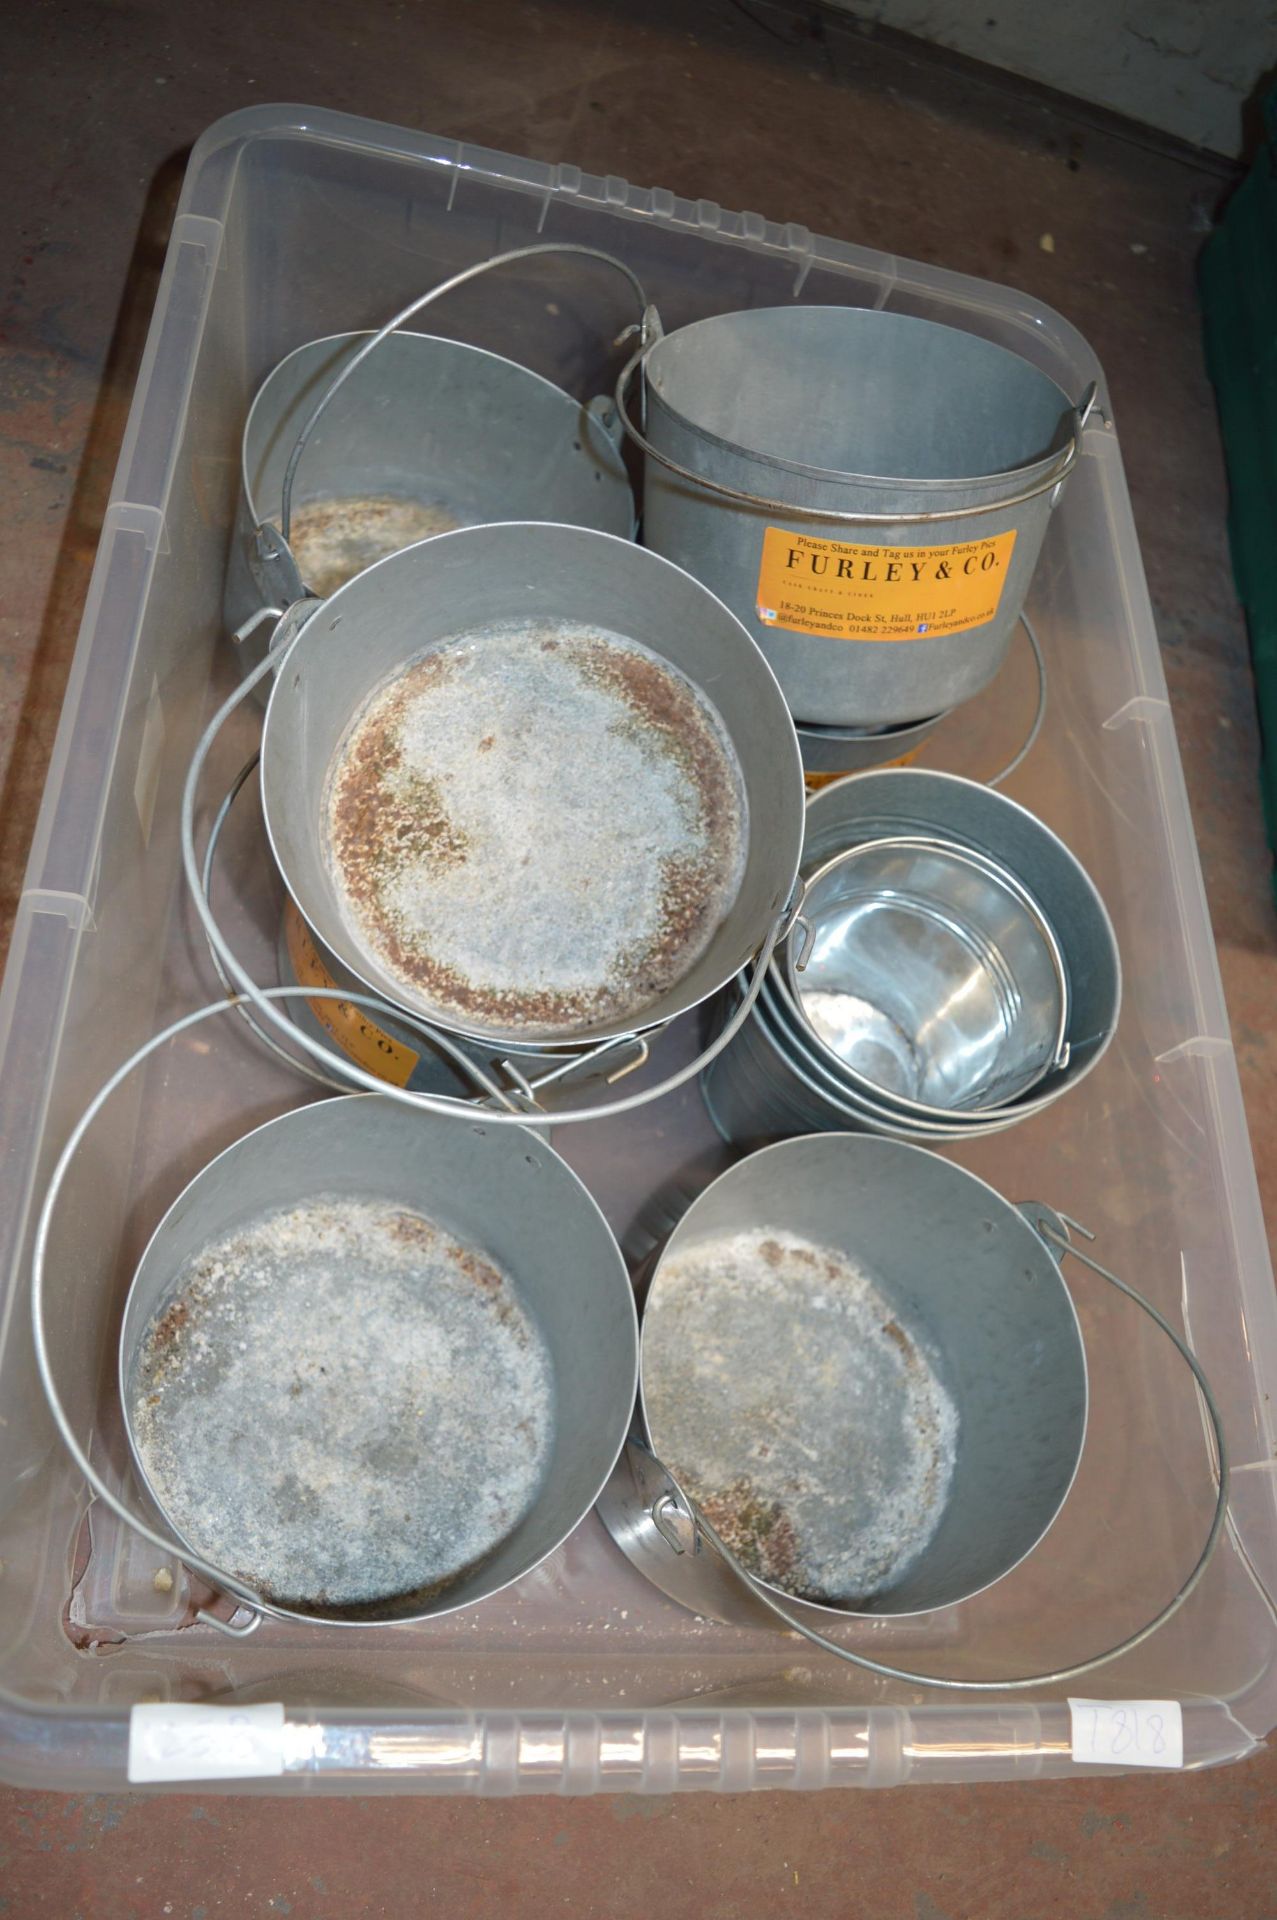 Quantity of Furley & Co. Buckets